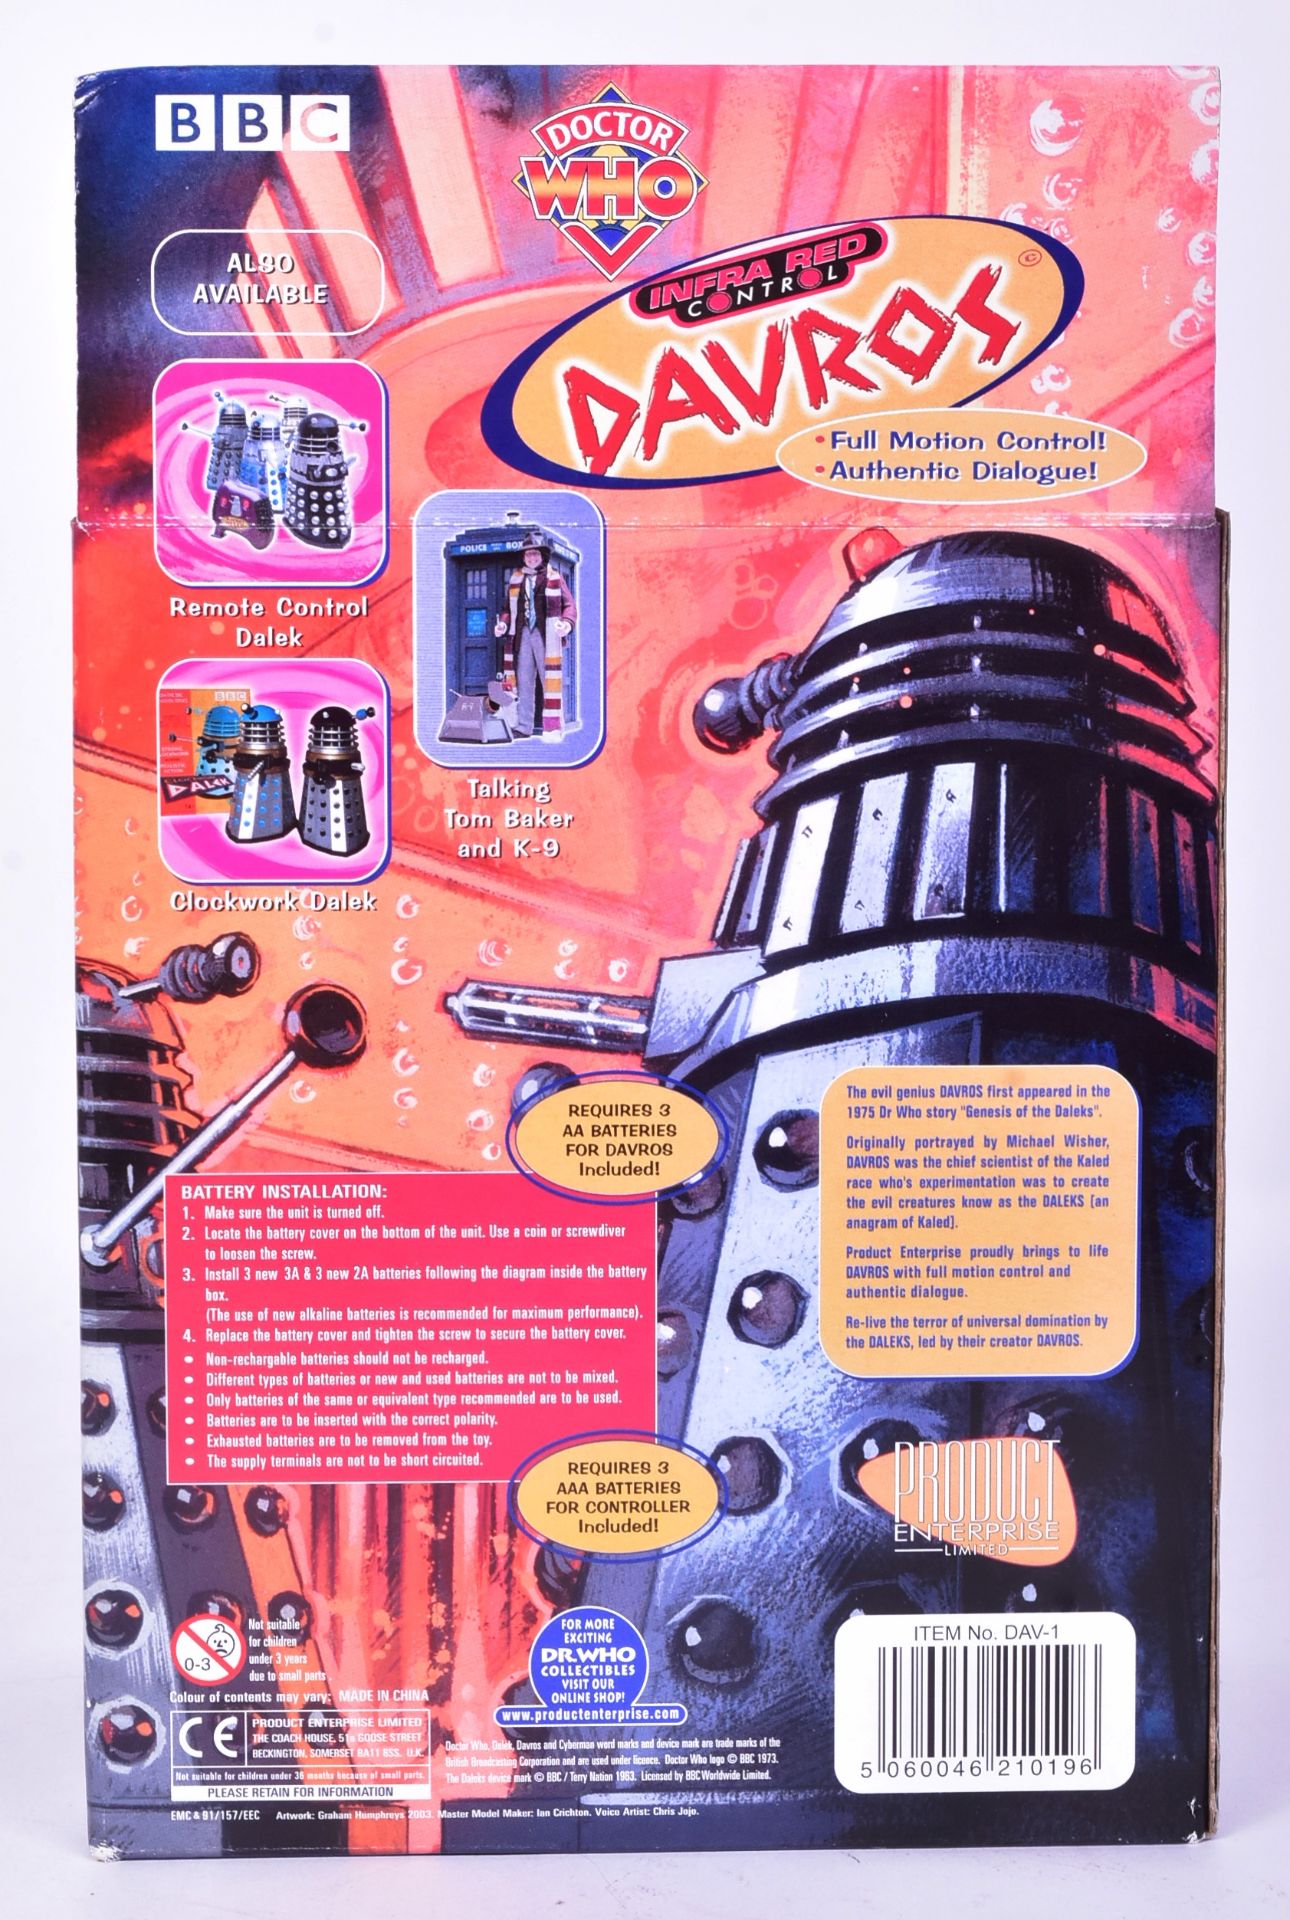 DOCTOR WHO - PRODUCT ENTERPRISE - INFRA-RED CONTROL DAVROS - Image 5 of 5